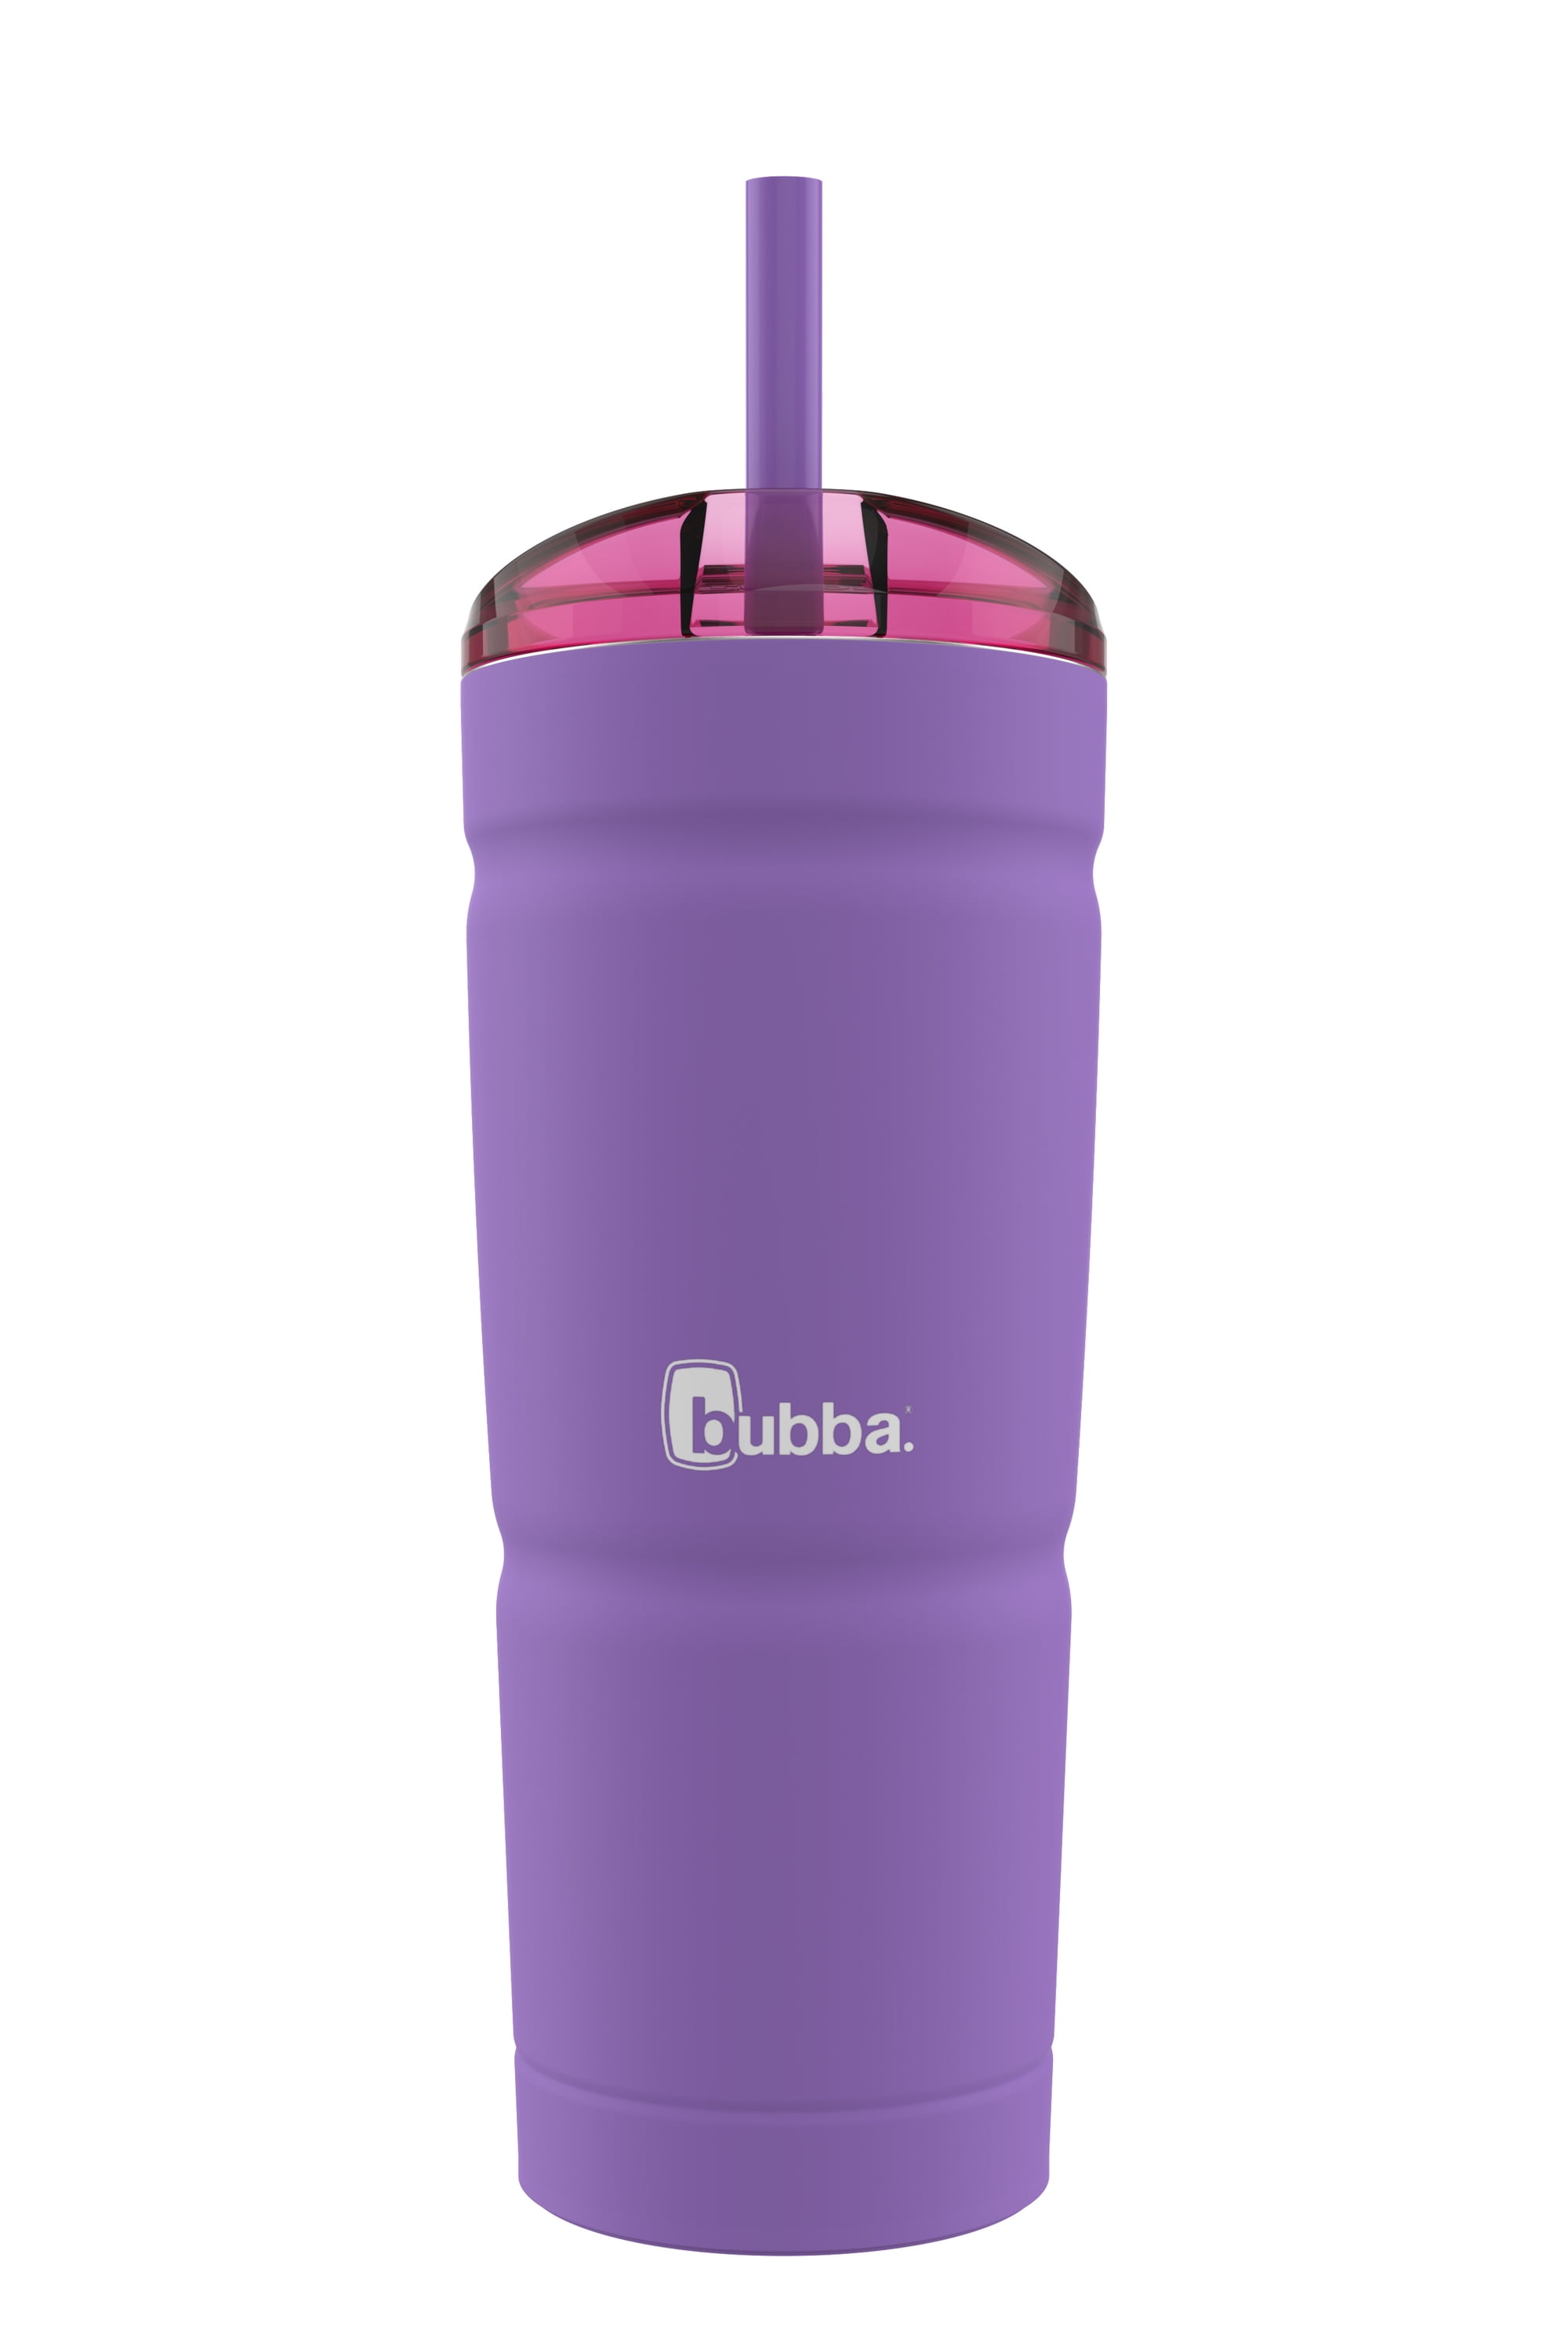 Promotional Bubba Envy Vacuum - Custom Promotional Products